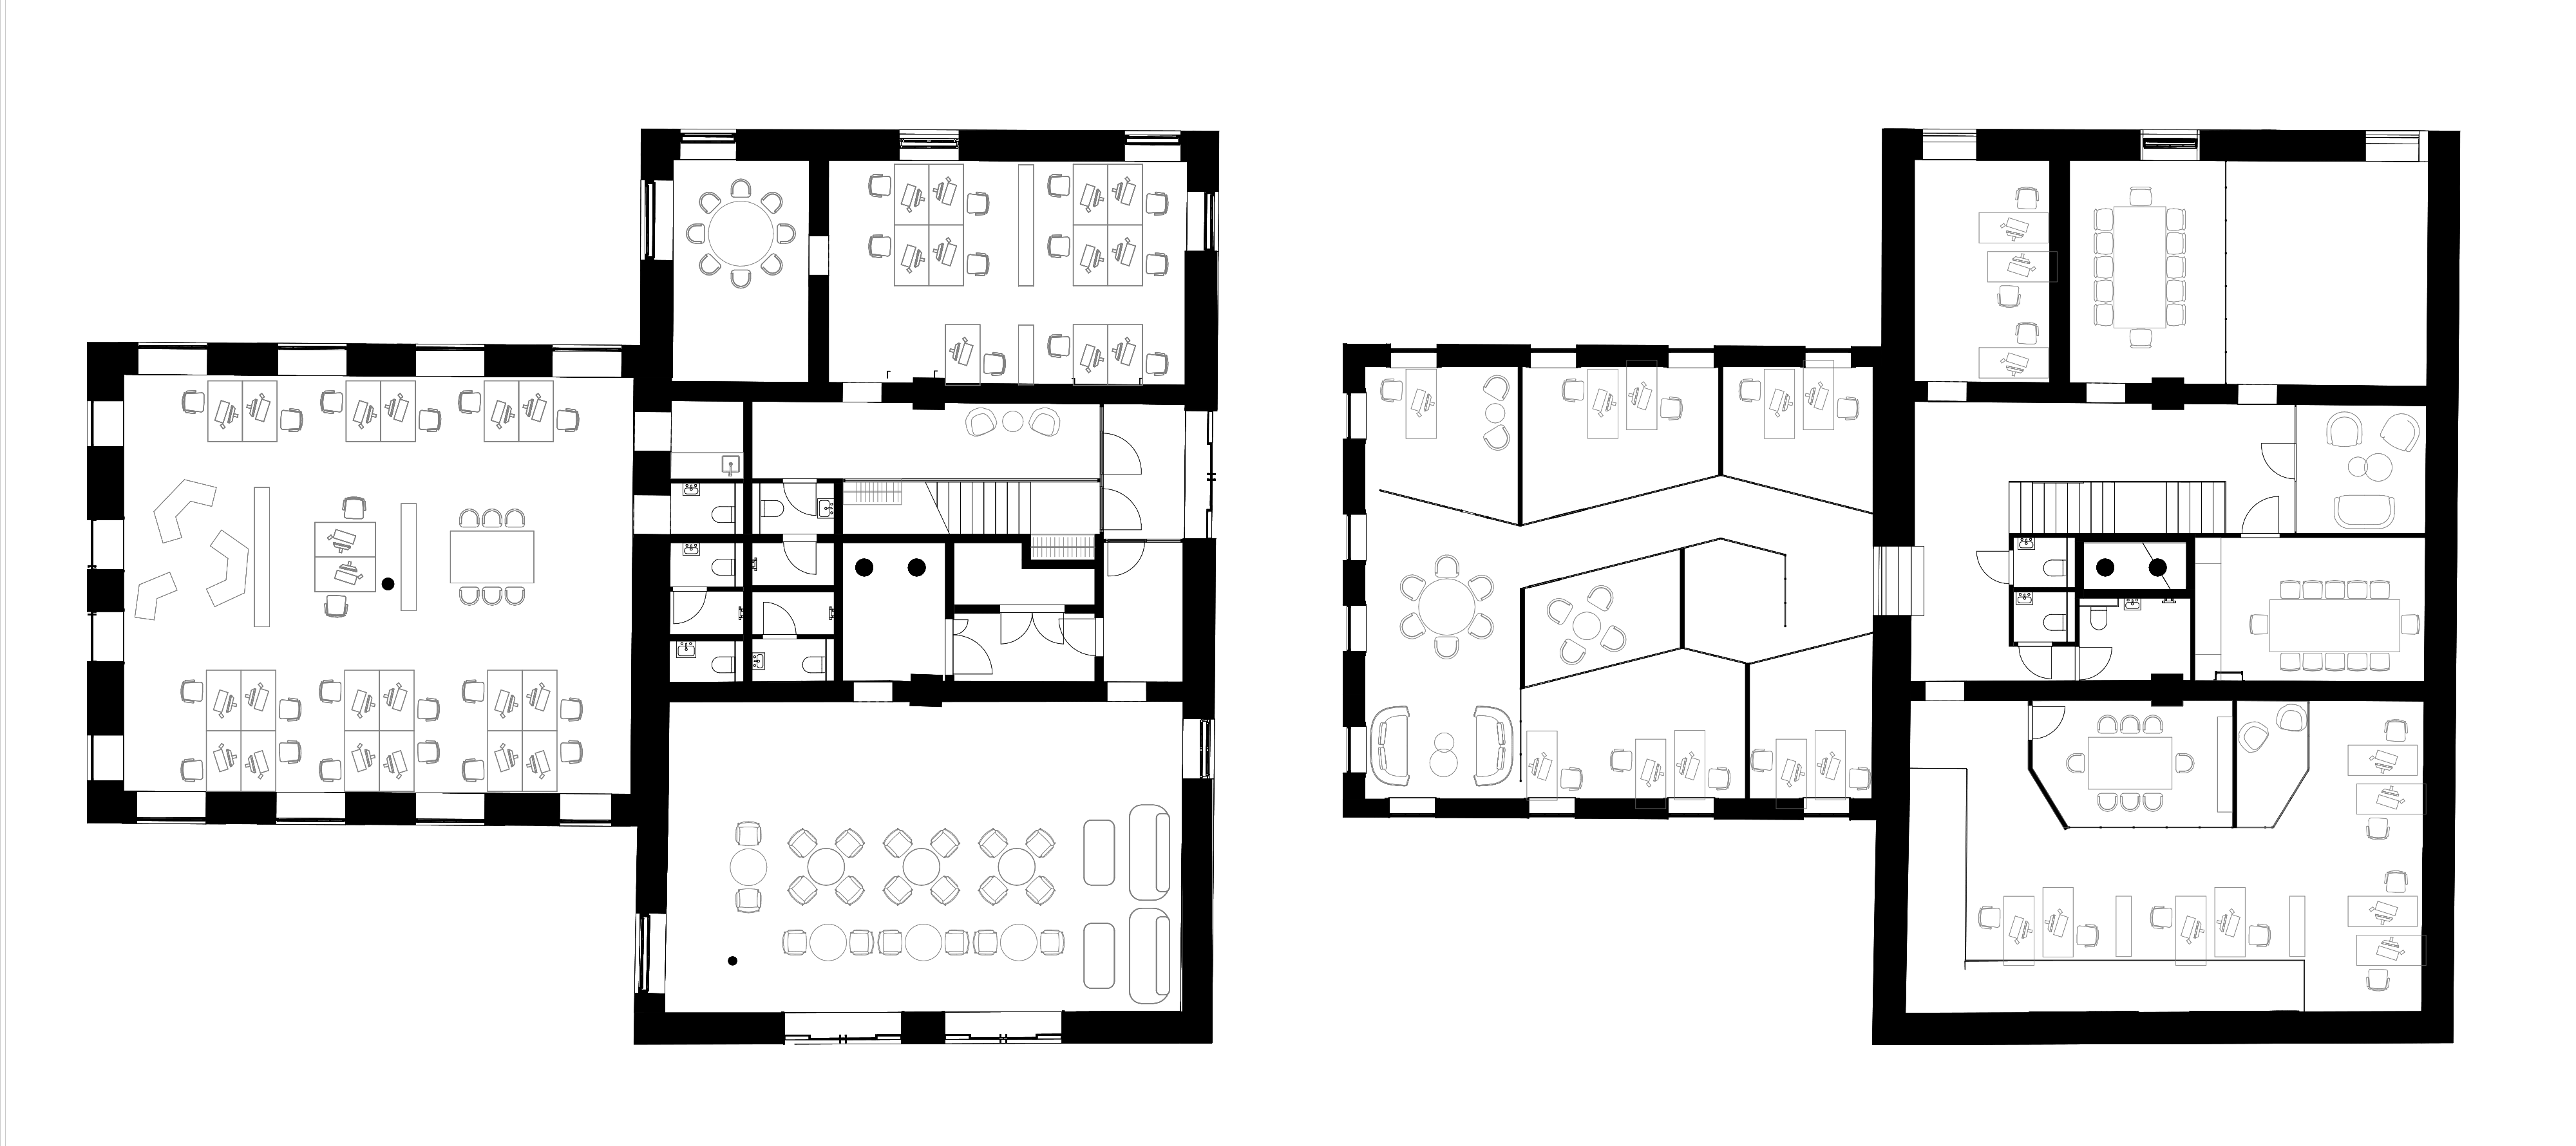 Ground and First floor plan